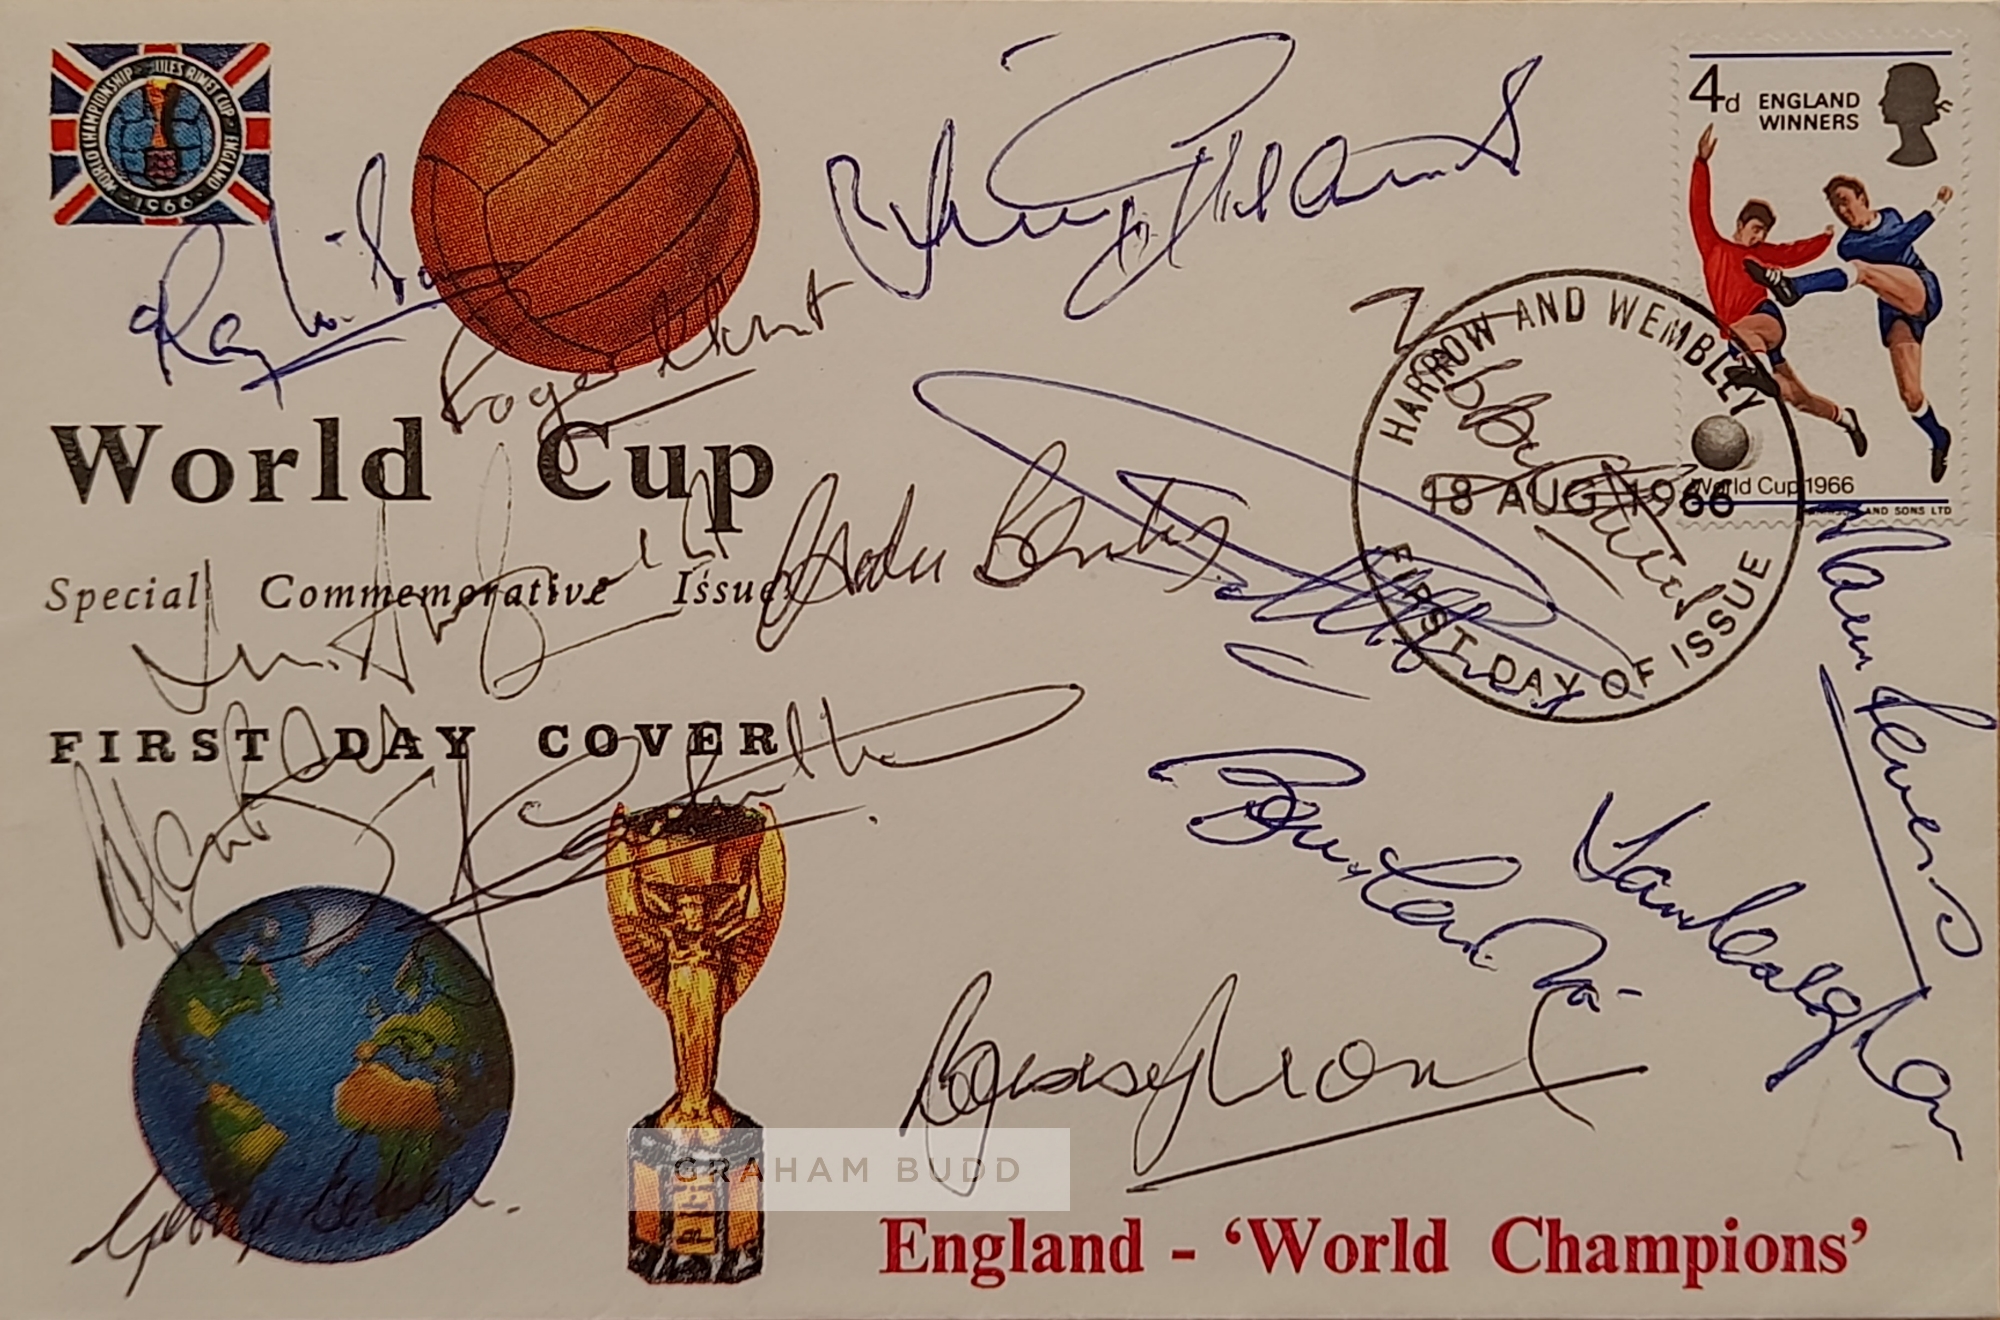 England 1966 World Cup winners signed Rembrandt FDC with the 4d England Winners stamp franked Harrow